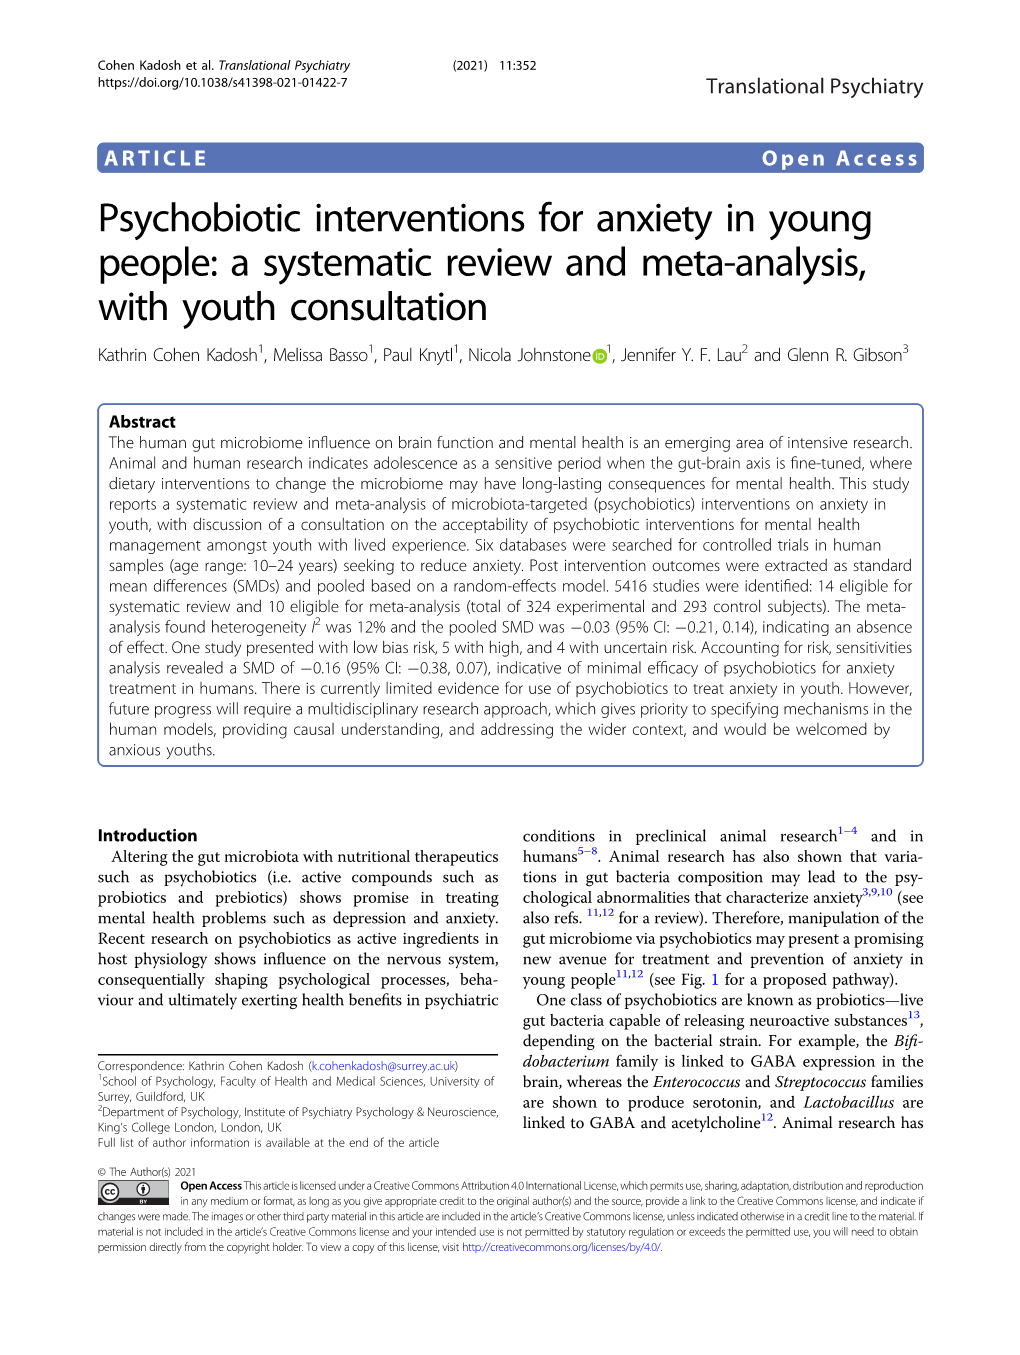 Psychobiotic Interventions for Anxiety in Young People